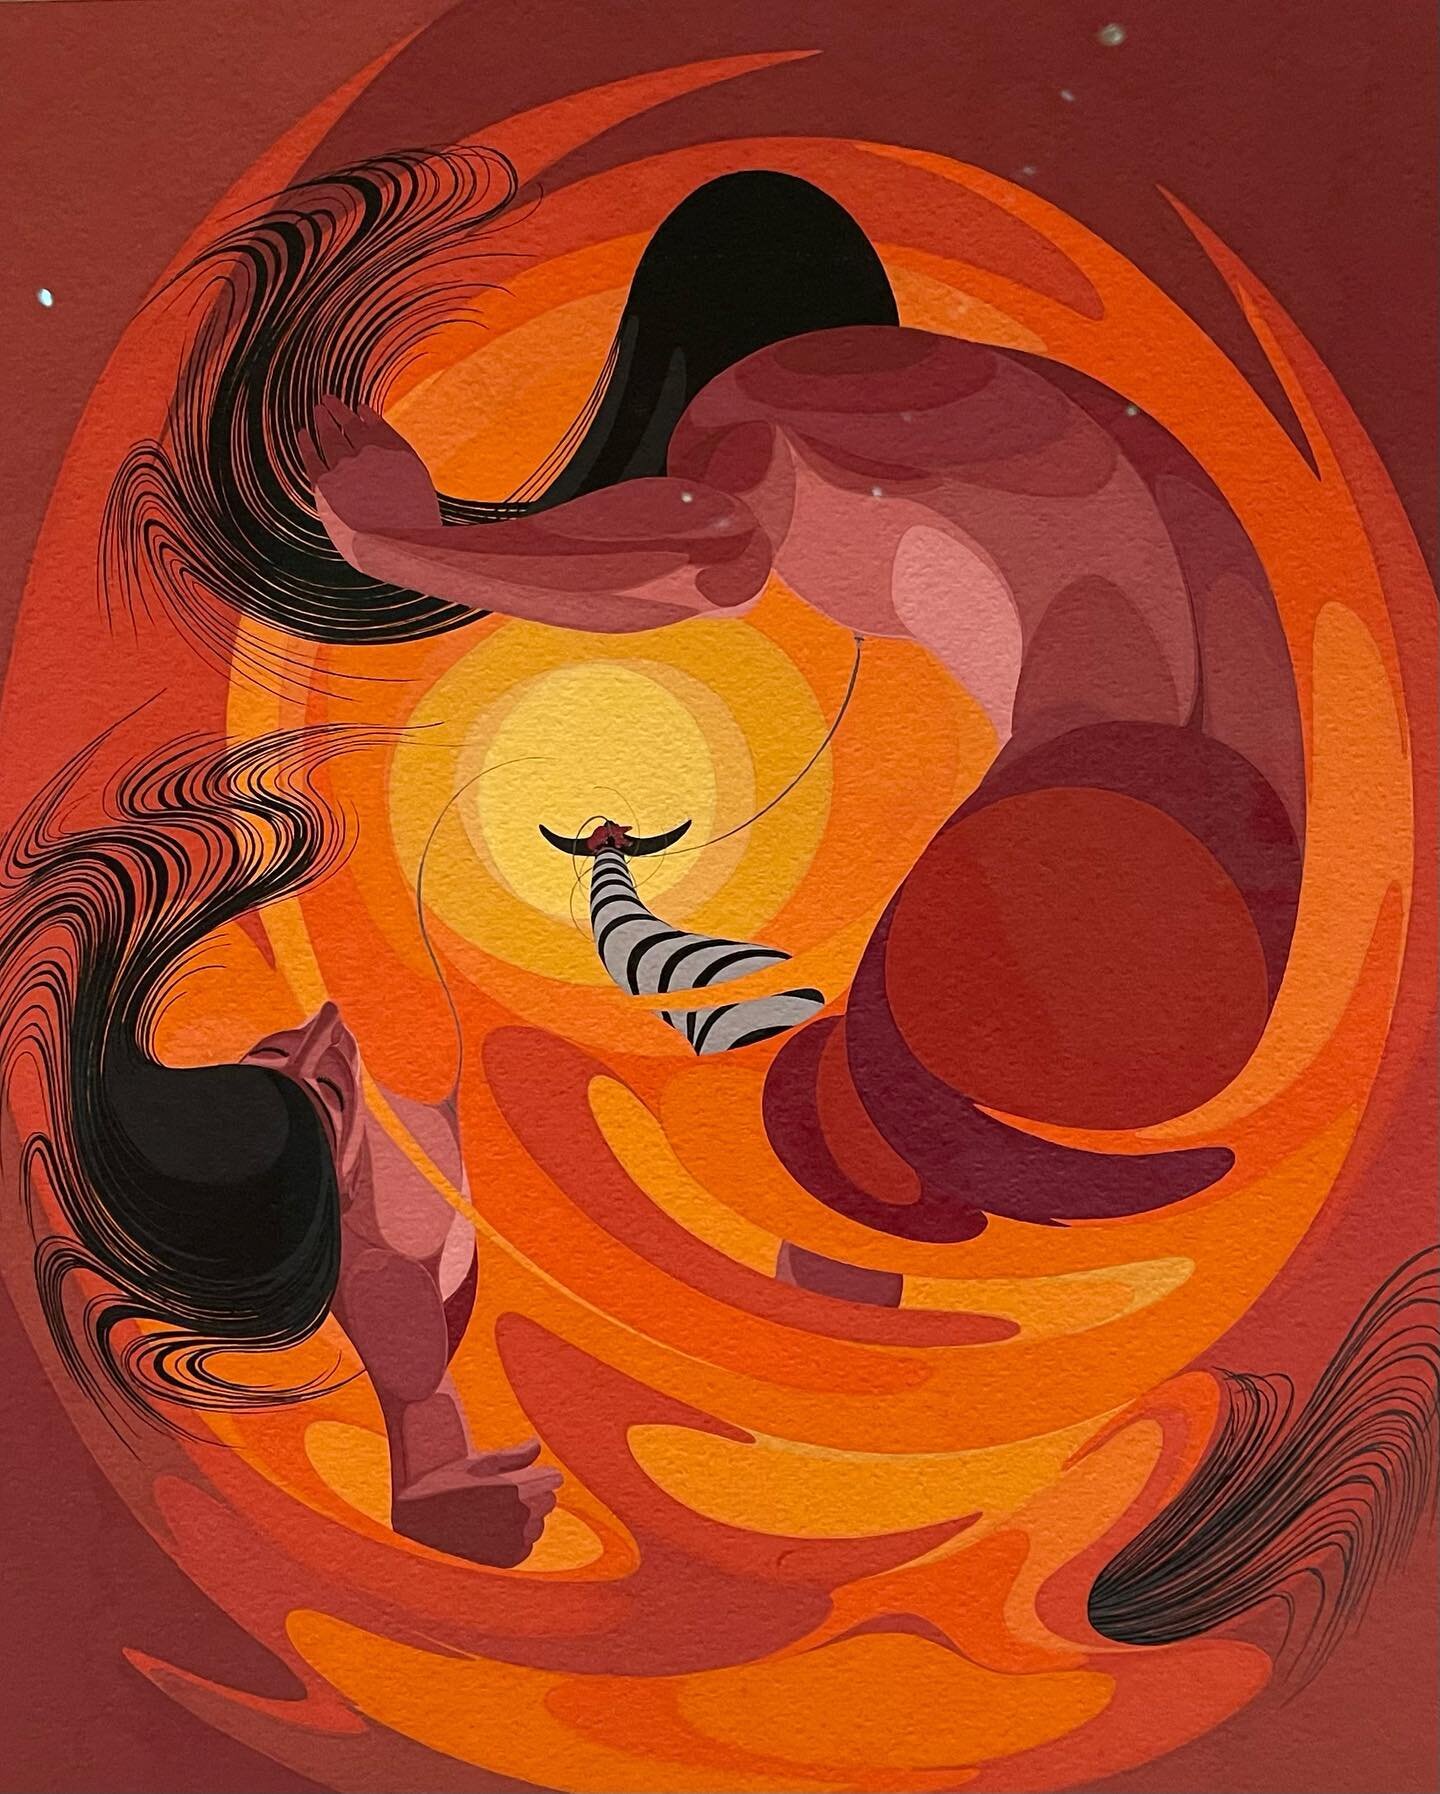 &ldquo;Dakota Modern: The Art of Oscar Howe&rdquo; currently @portlandartmuseum introduces a Native American artist of towering significance. While a practicing Episcopalian he was immersed in Dakota spirituality. He portrayed indigenous themes and h